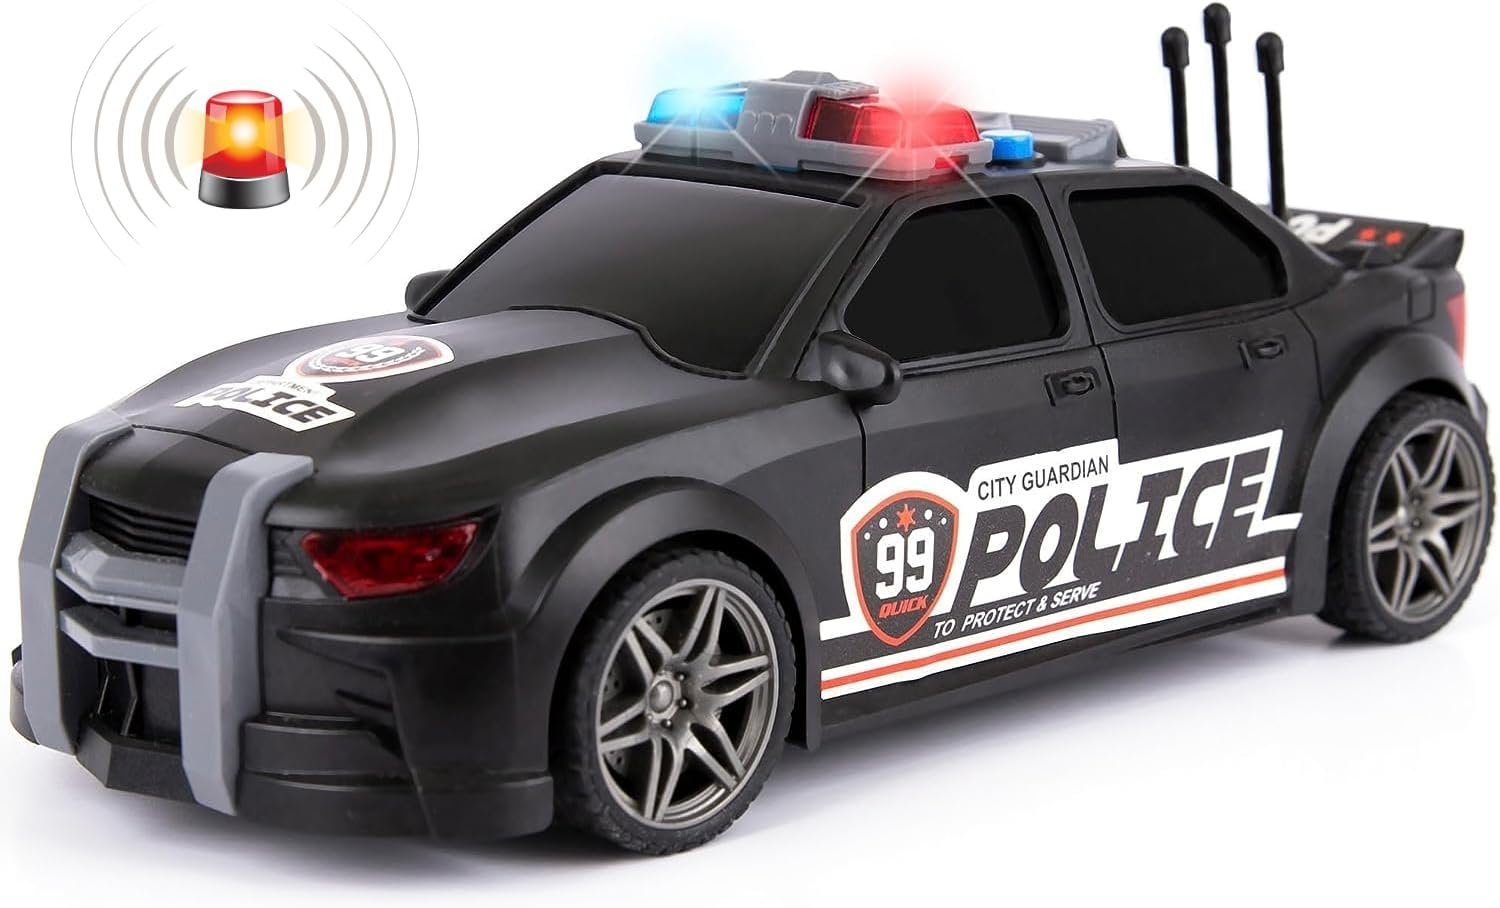 Police Car Toys for Boys 3,4,5 with Lights & Siren Sounds